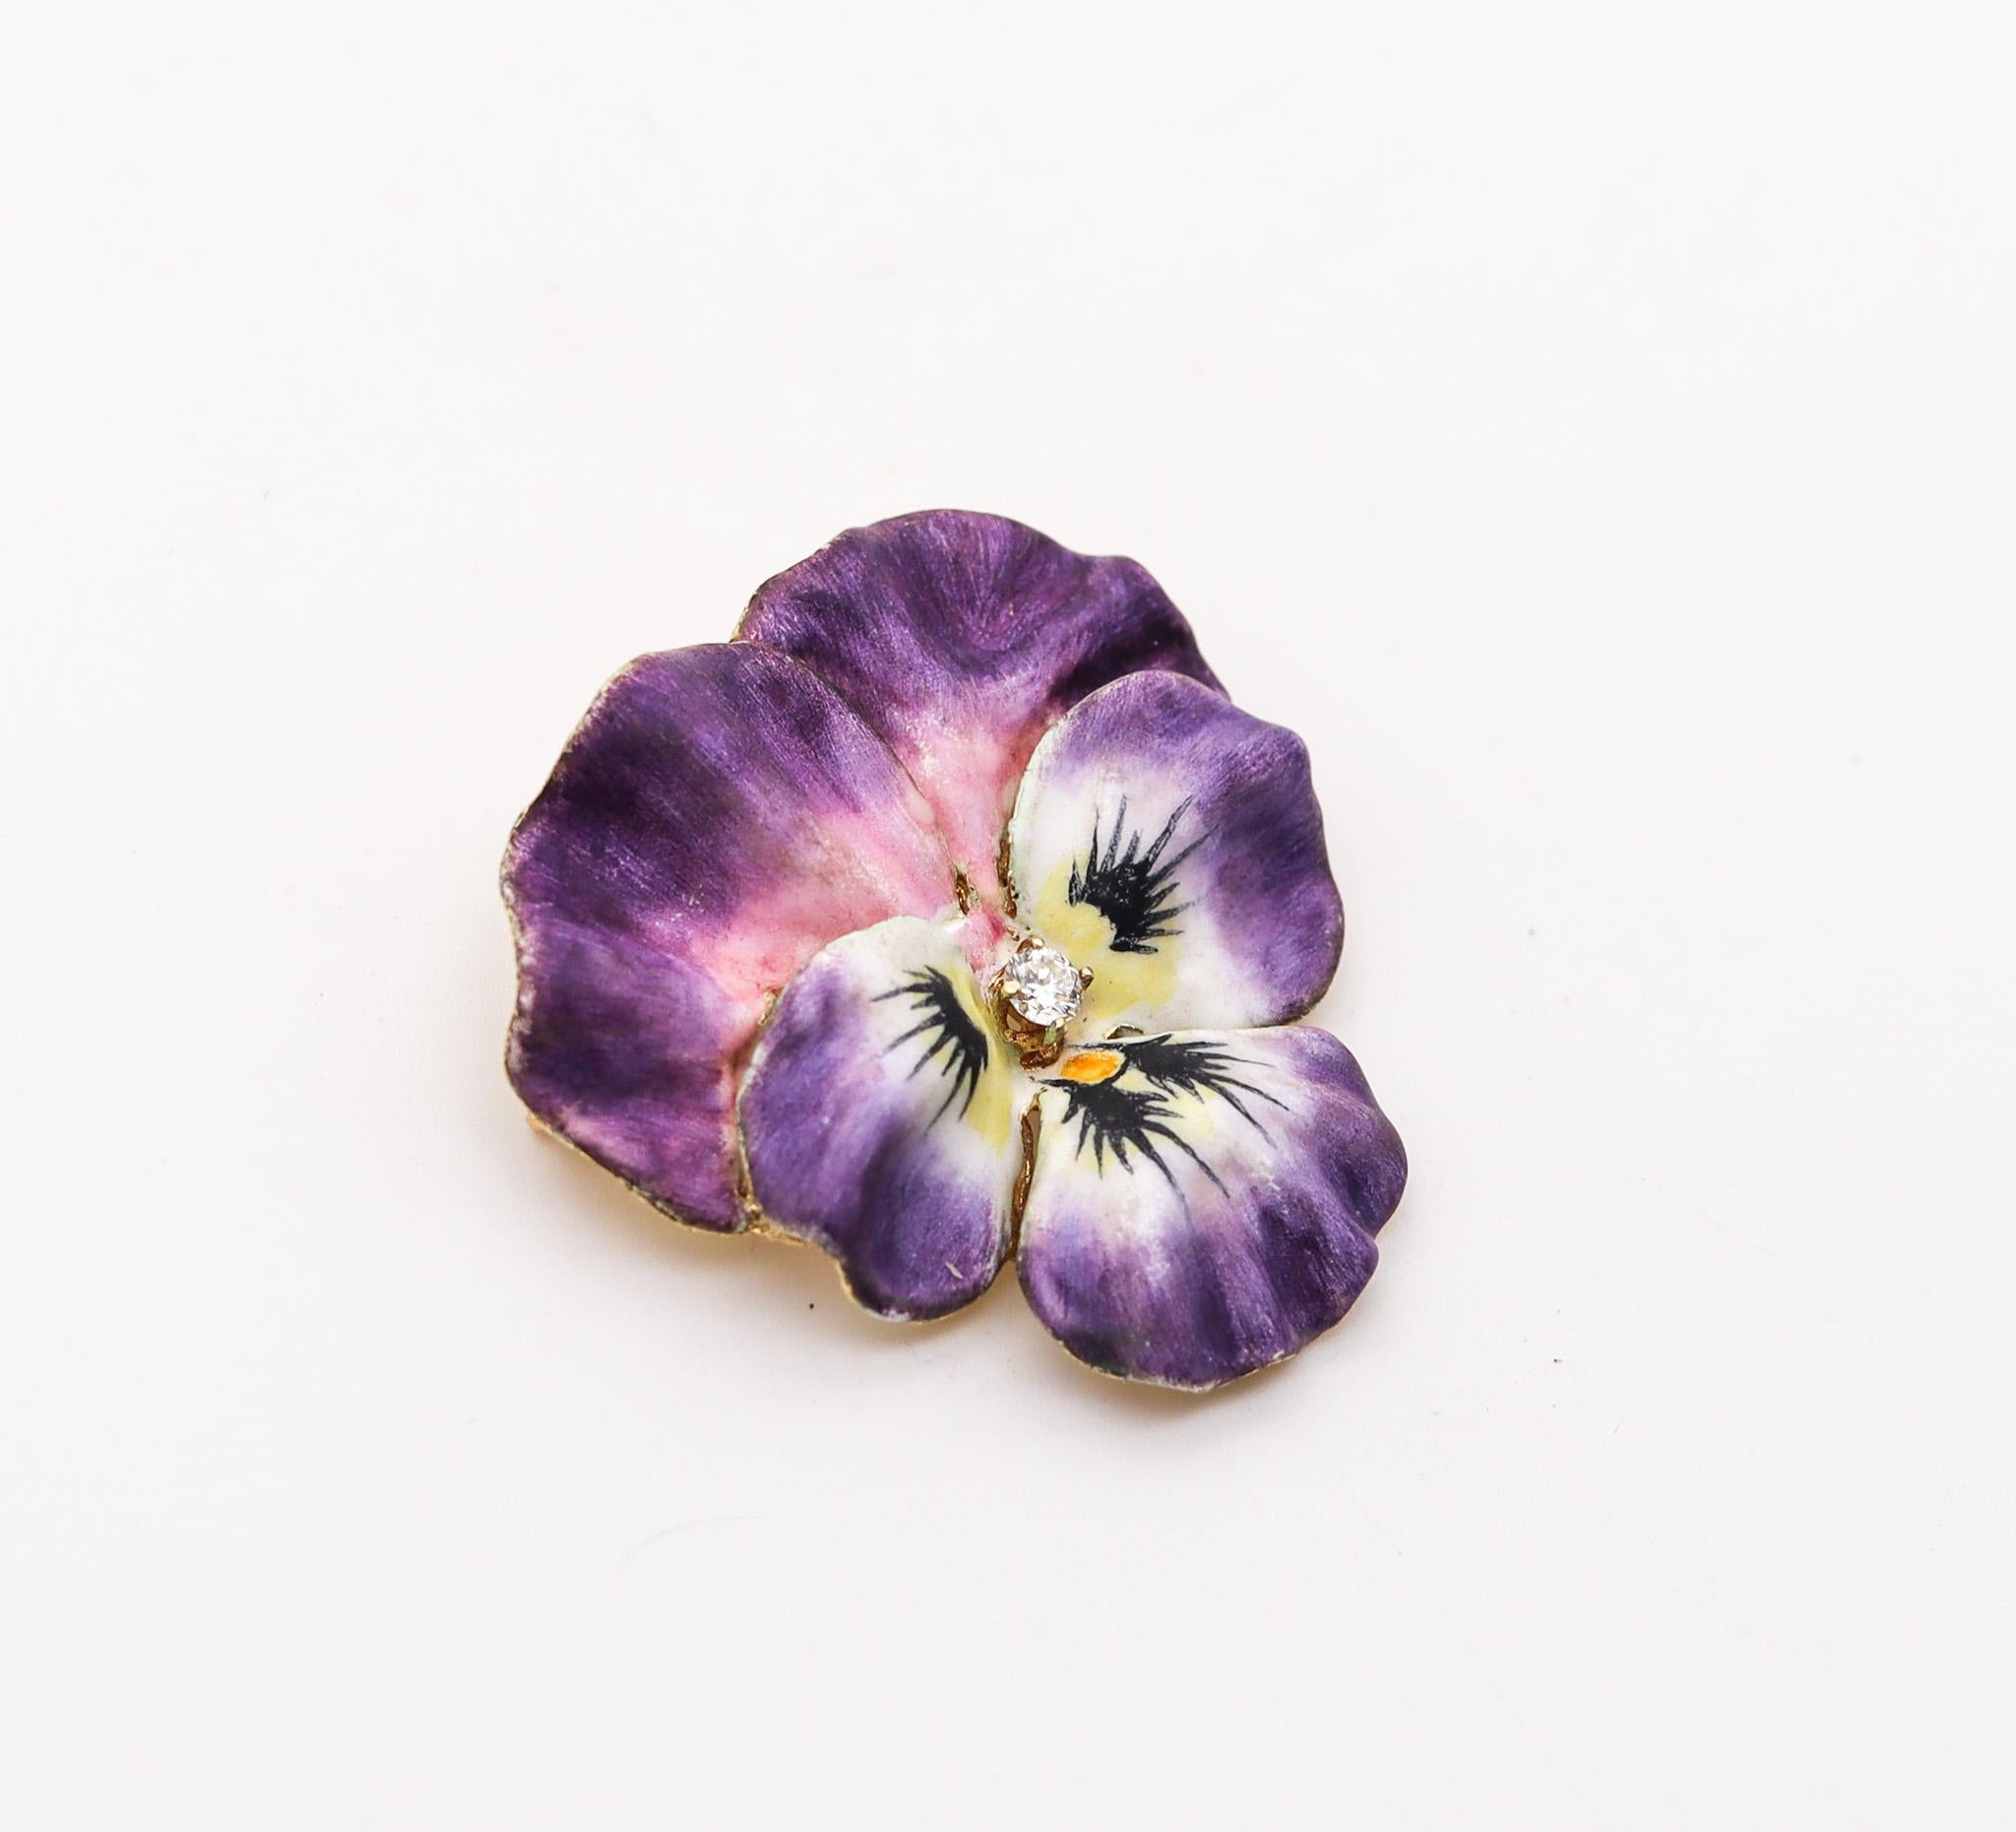 Edwardian enameled Pansy flower brooch.

Beautiful three-dimensional five-petals pansy flower, created in New Jersey North America during the Edwardian and the Art Nouveau periods, between the 1900-1910. This versatile pendant brooch has been